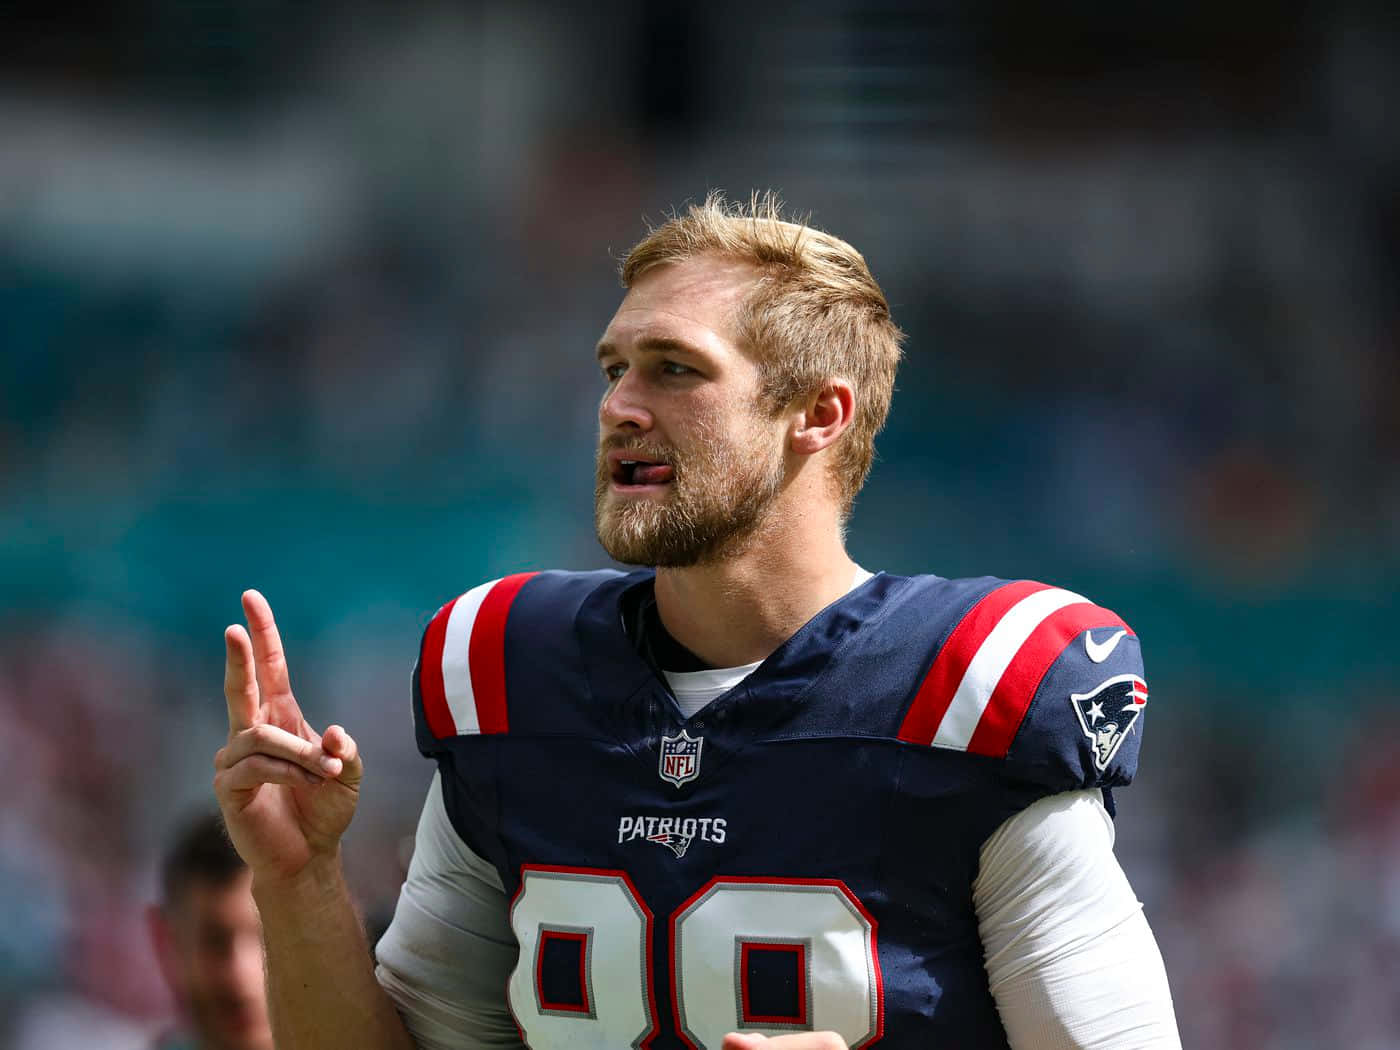 Patriots Player Gesturing During Game Wallpaper